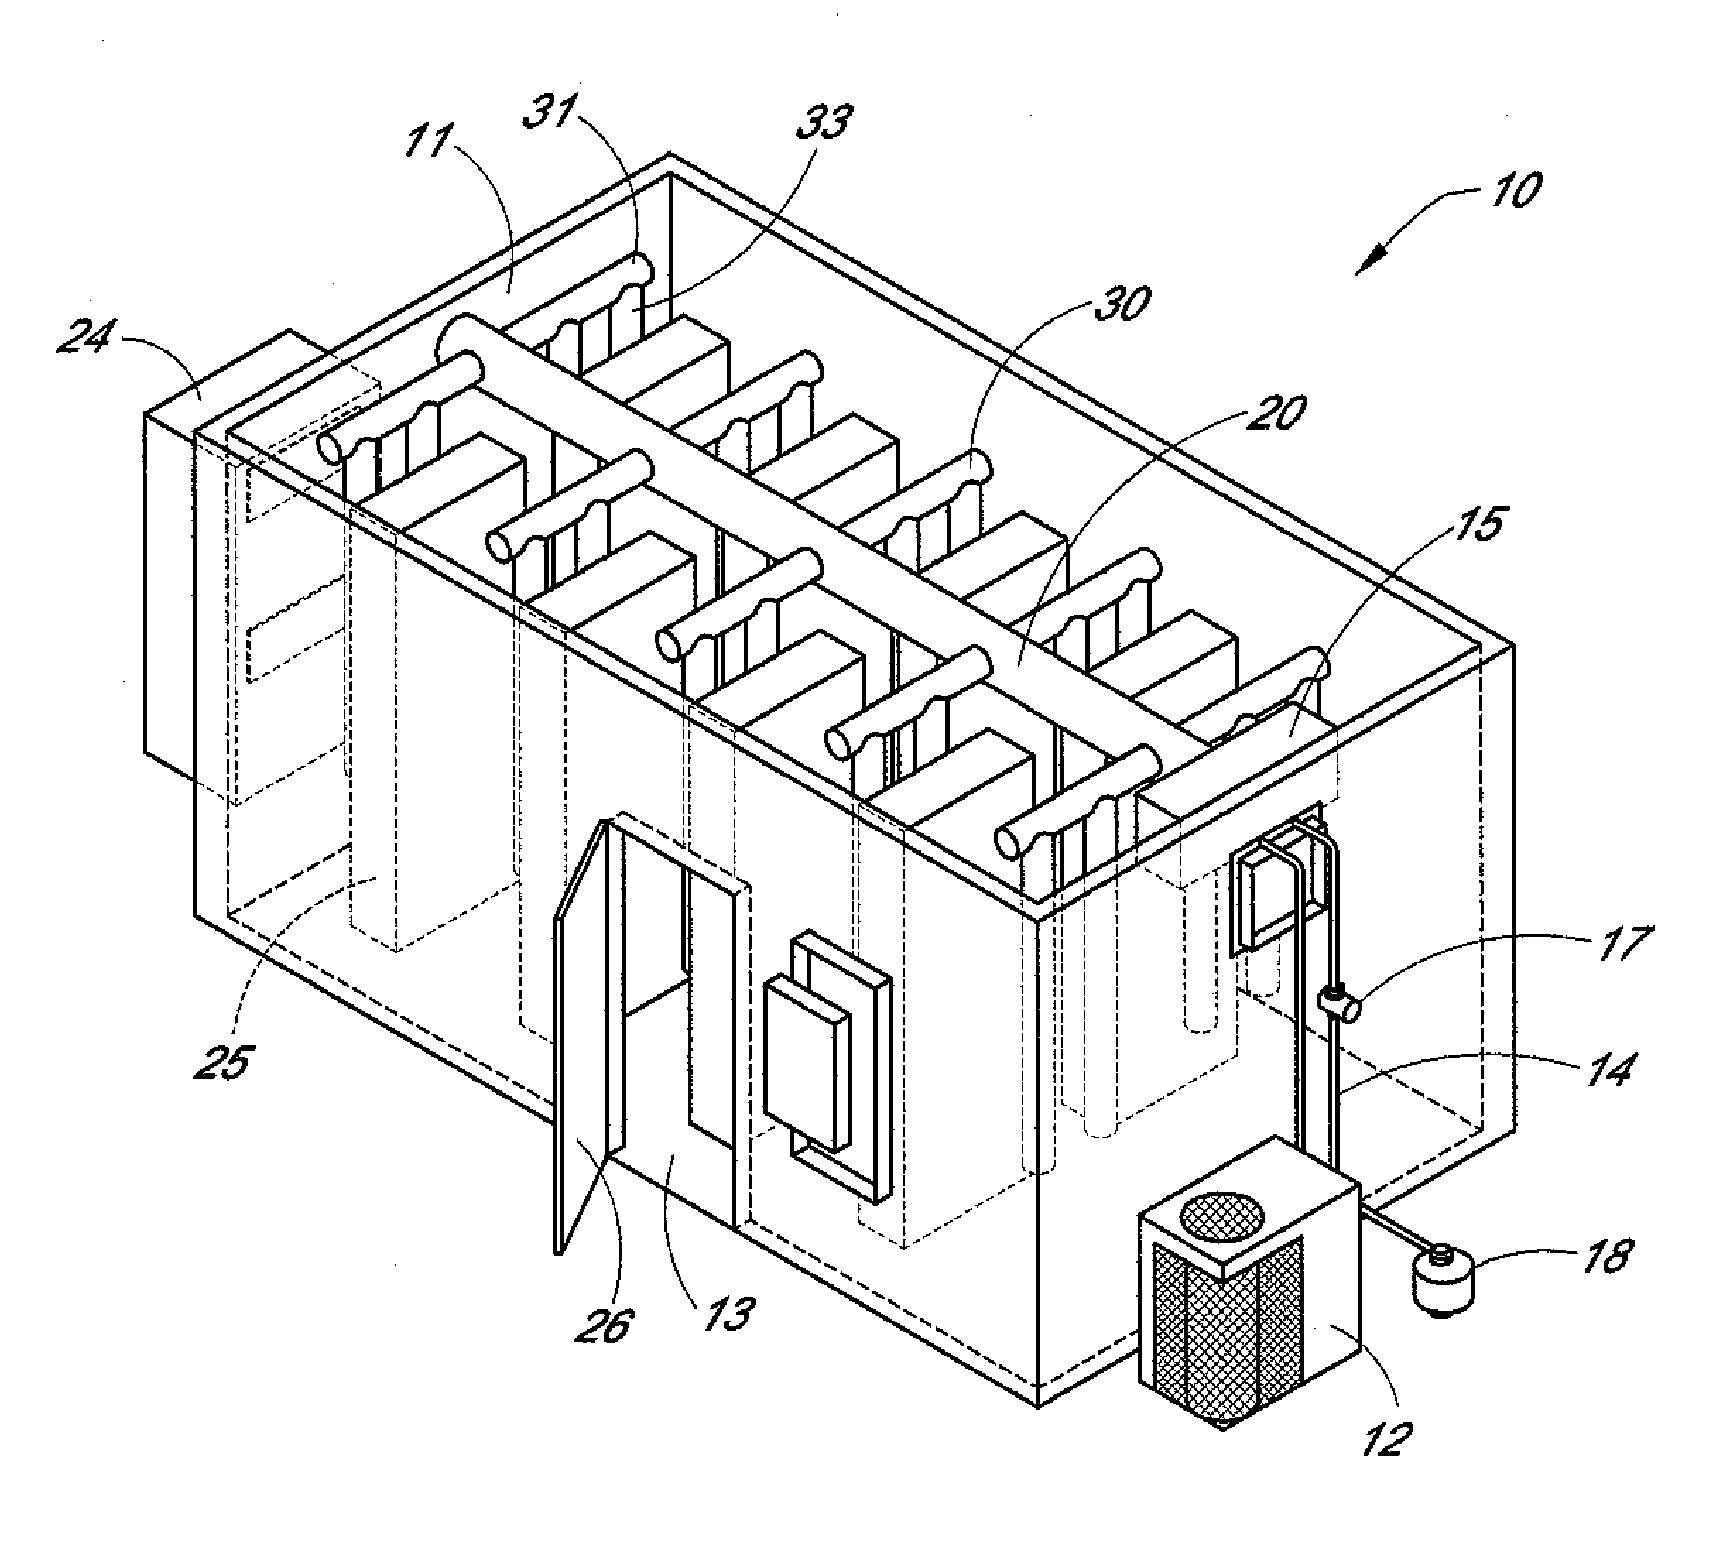 Telecommunications shelter with emergency cooling and air distribution assembly